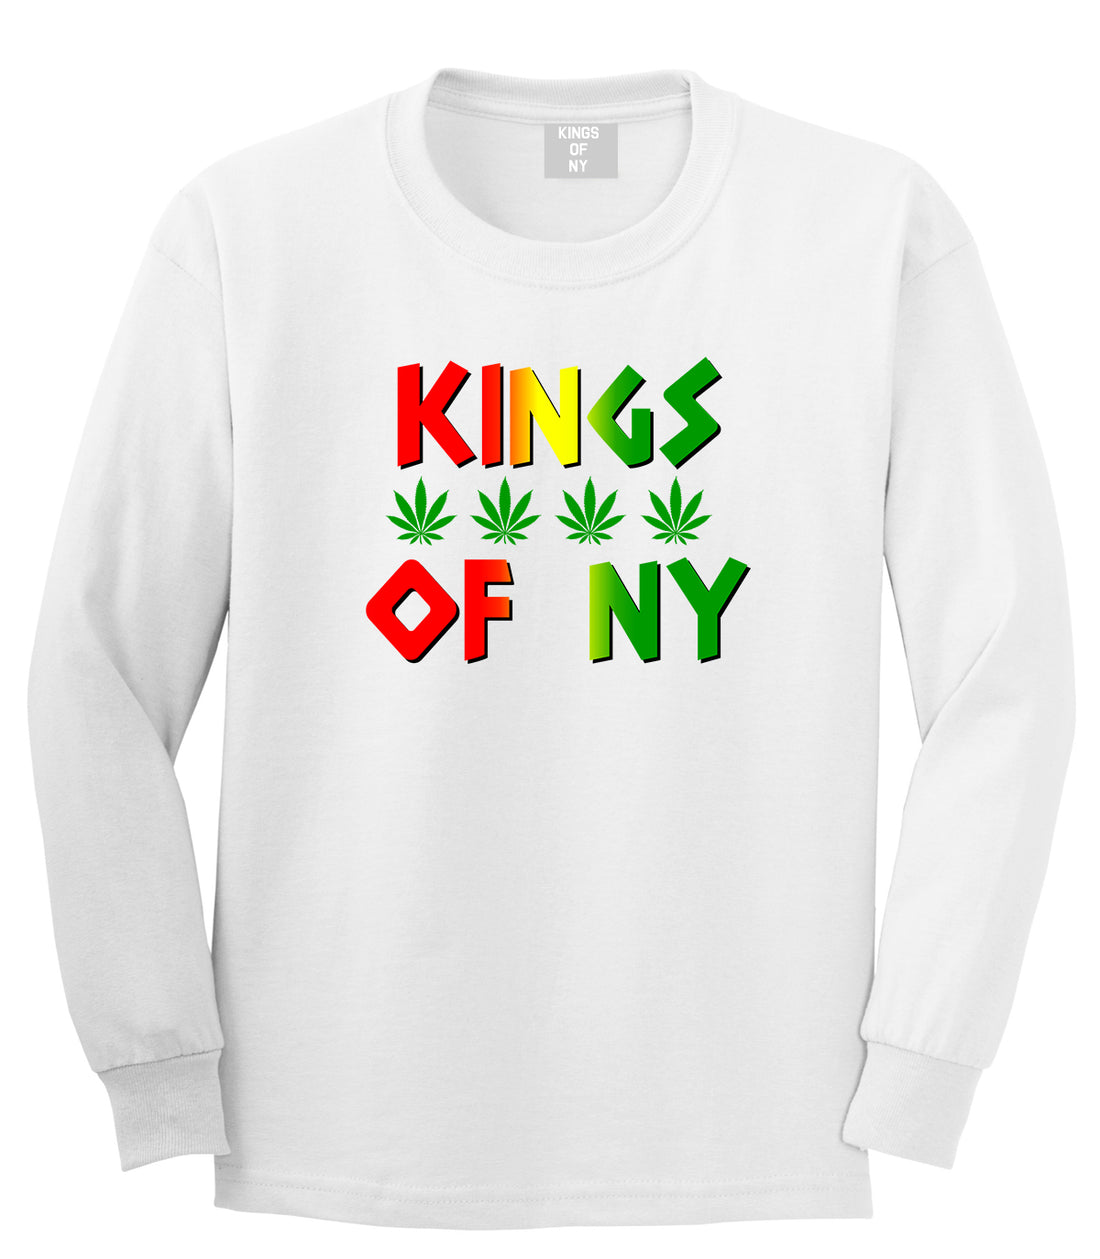 Puff Puff Pass Mens Long Sleeve T-Shirt White by Kings Of NY